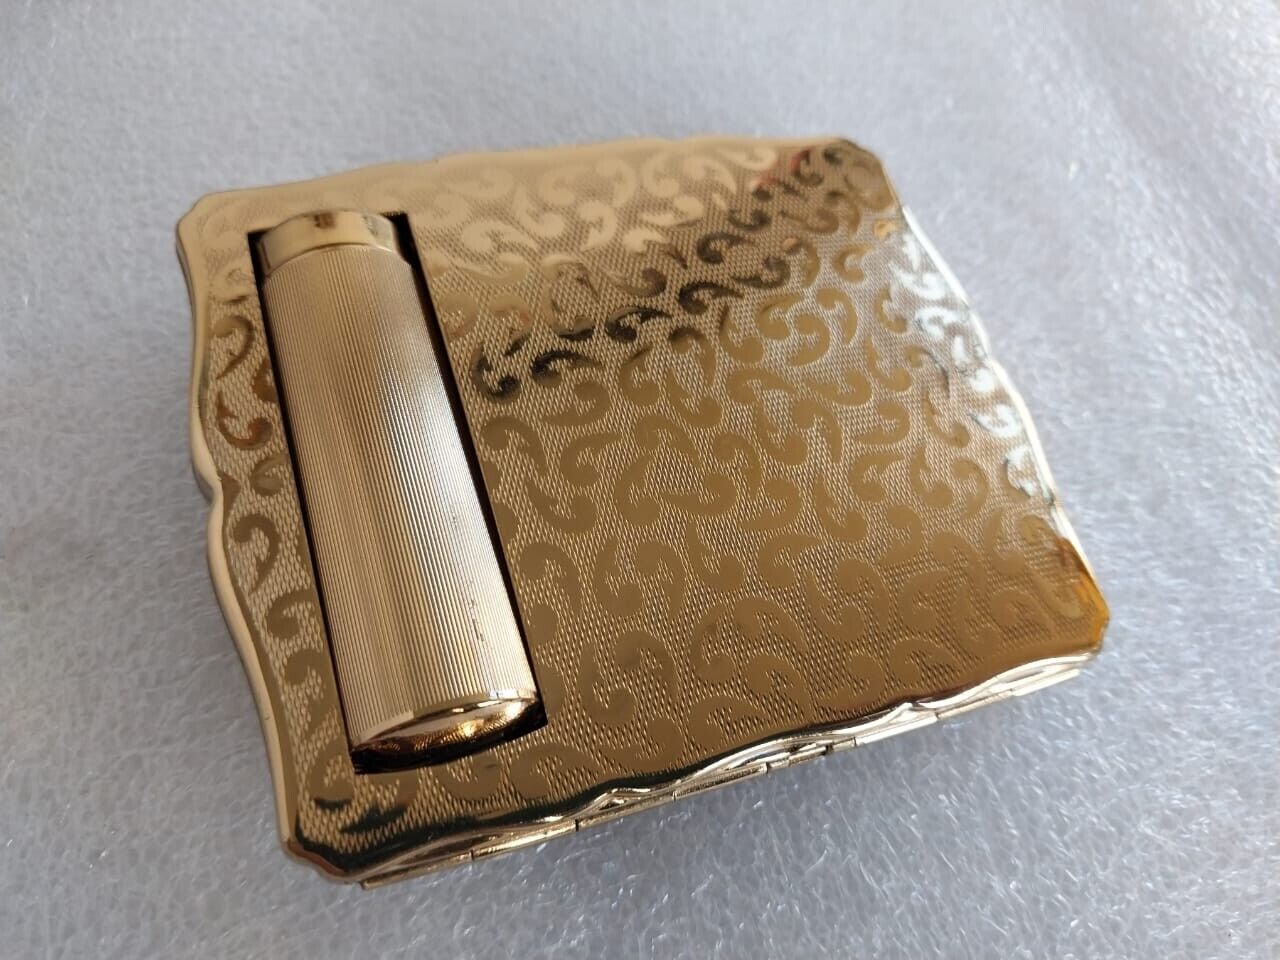 Vintage Stratton Powder Compact NEW OLD STOCK Lipstick holder Gold plated bo